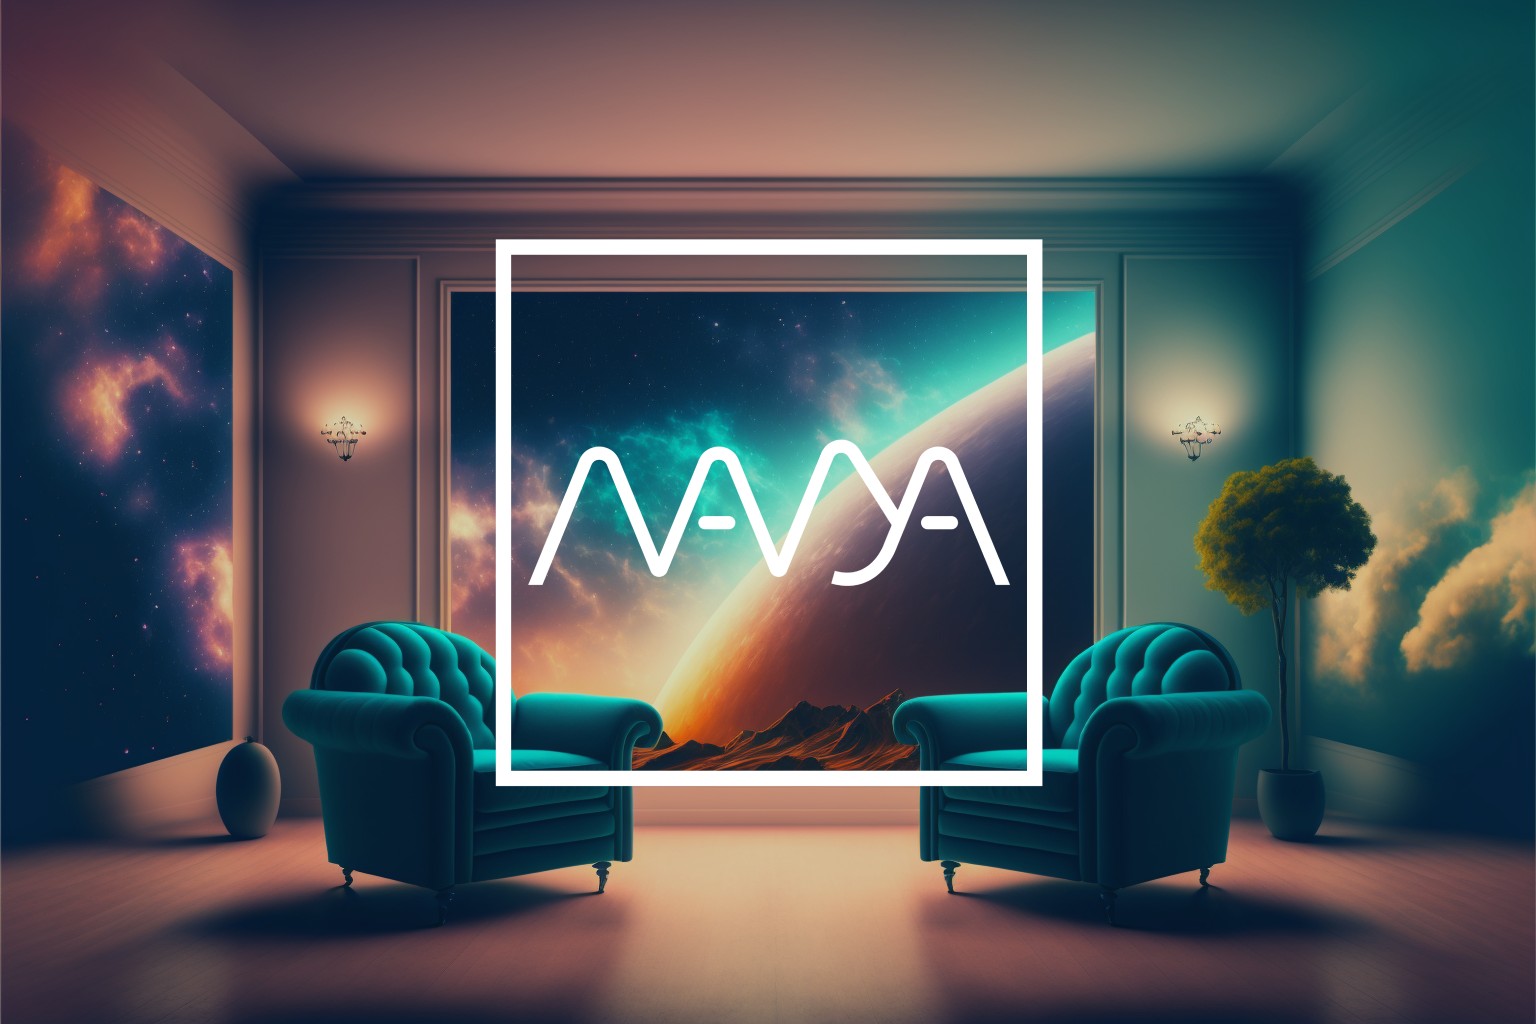 Navya Online Hypnotherapy Clinic Rebrands Using AI Generated Imagery